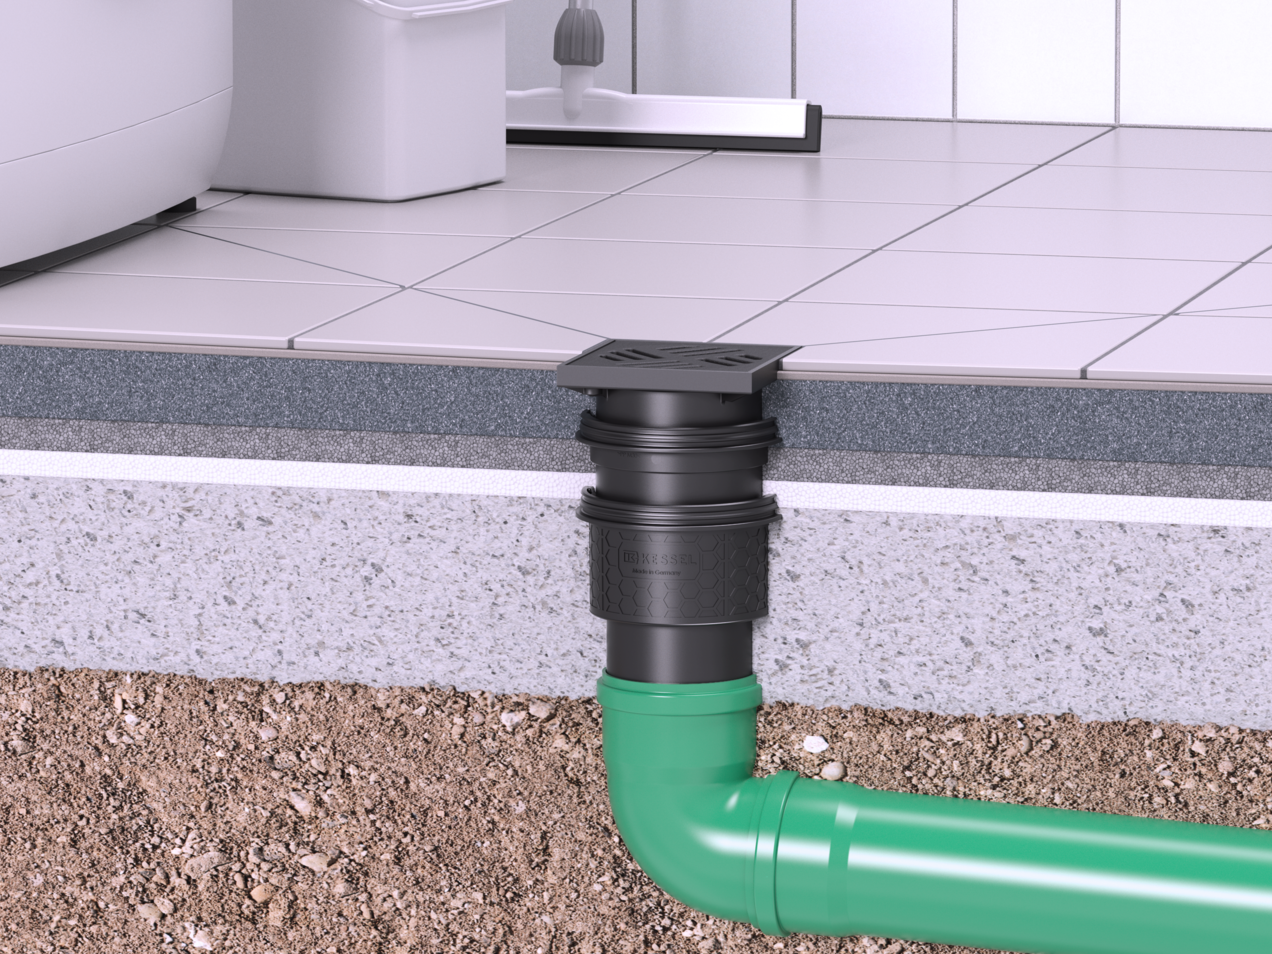 Practicus basement drain for floor slab installation, with a vertical outlet